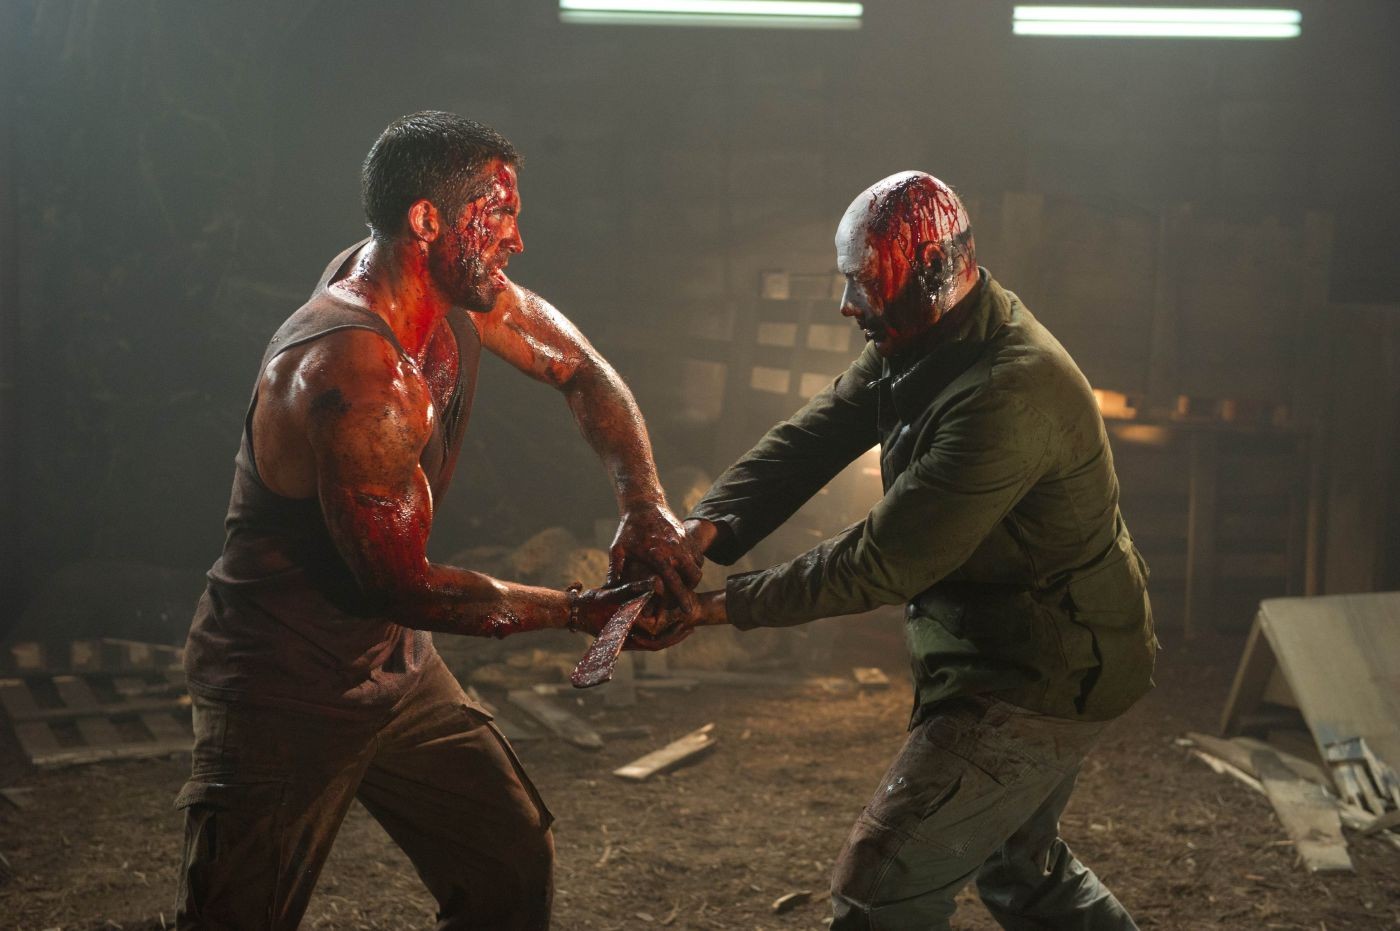 Scott Adkins stars as John and Jean-Claude Van Damme stars as Luc Deveraux in Magnet Releasing's Universal Soldier: Day of Reckoning (2012)